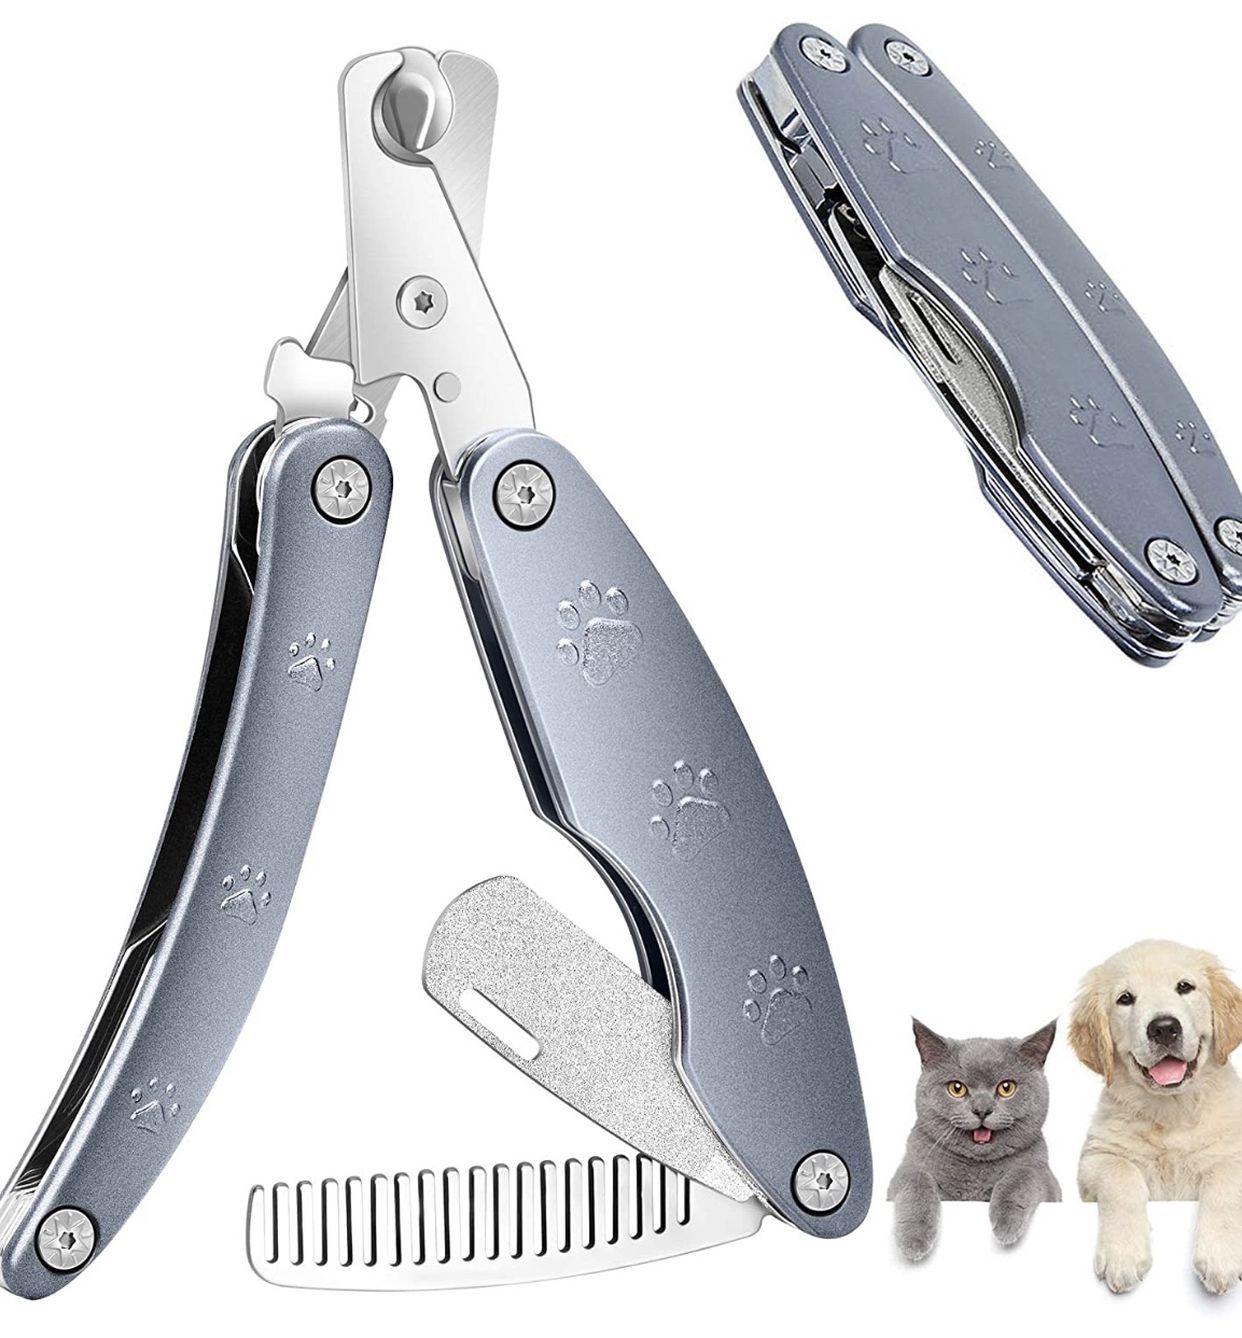 Dog Nail Clippers，cat Nail Clippers with Safety Guard Avoid Over-Cutting Dog Nail Trimmer Free Nail File &Comb 3 in 1 Foldable Dog Nail Clippers Profe